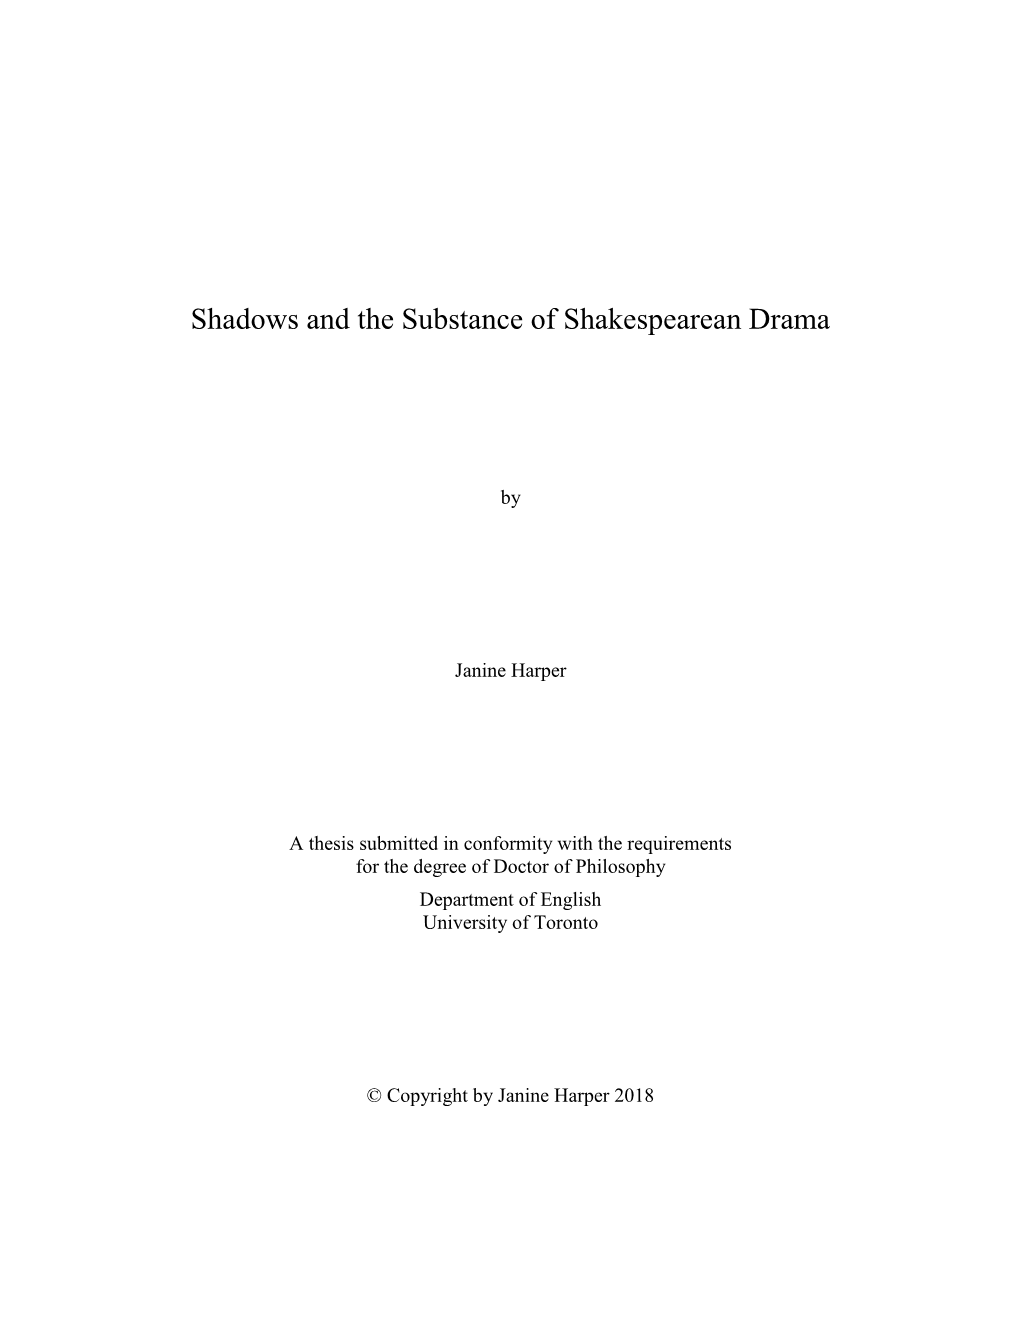 Shadows and the Substance of Shakespearean Drama